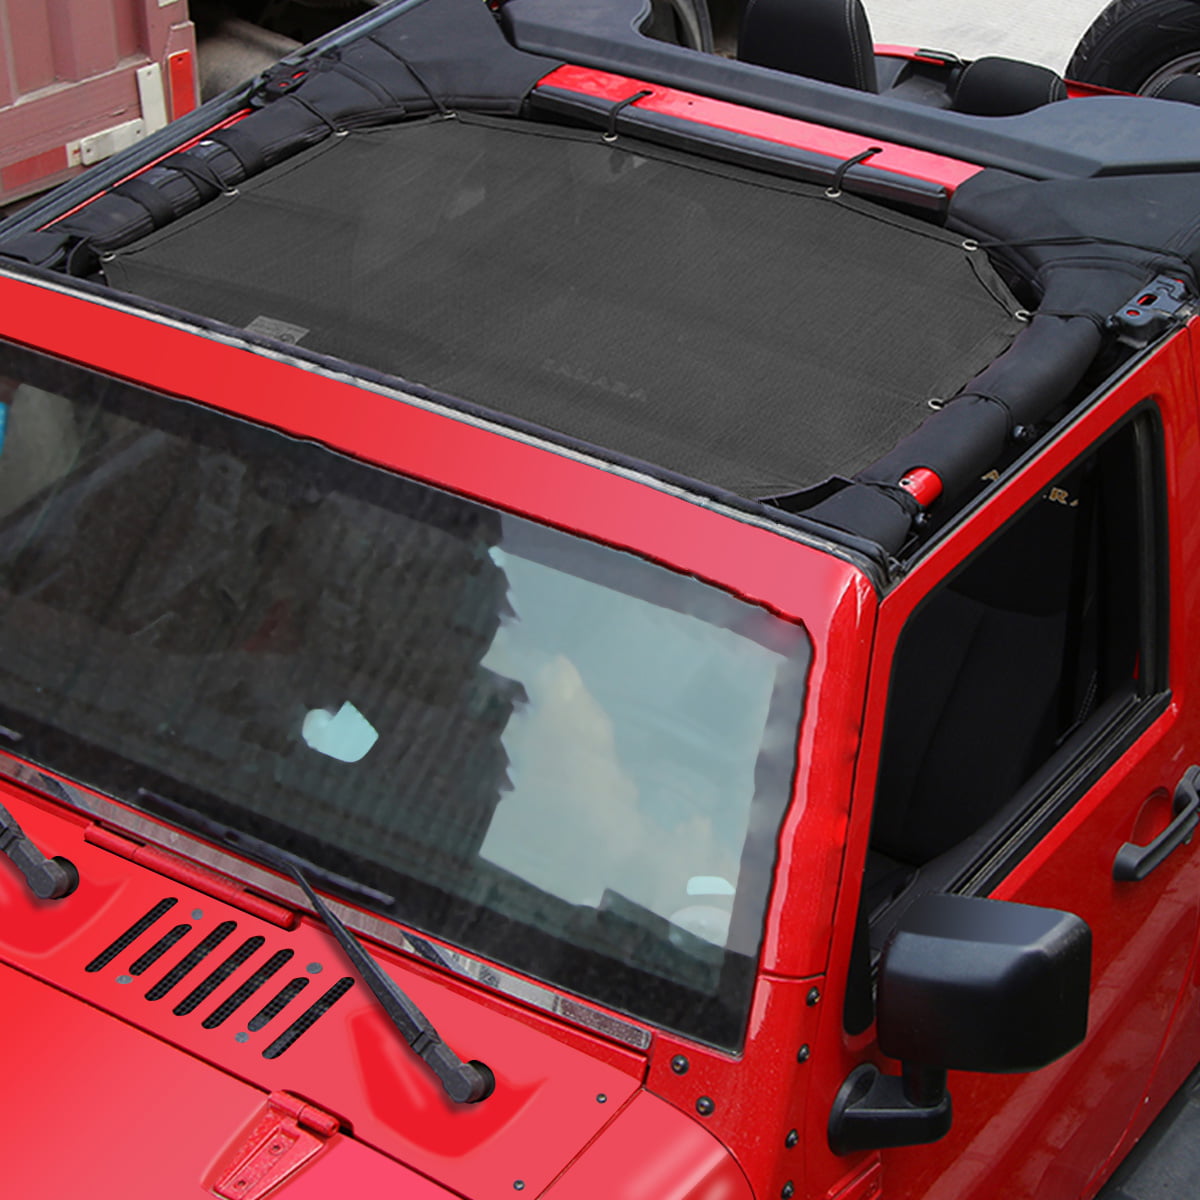 Protect Your Cargo Area and Rear Passengers From Harmful UV Rays for Your 2-Door JK Cherry Red ALIEN SUNSHADE for Jeep Wrangler Mesh Cage Side Shades 2007-2017 